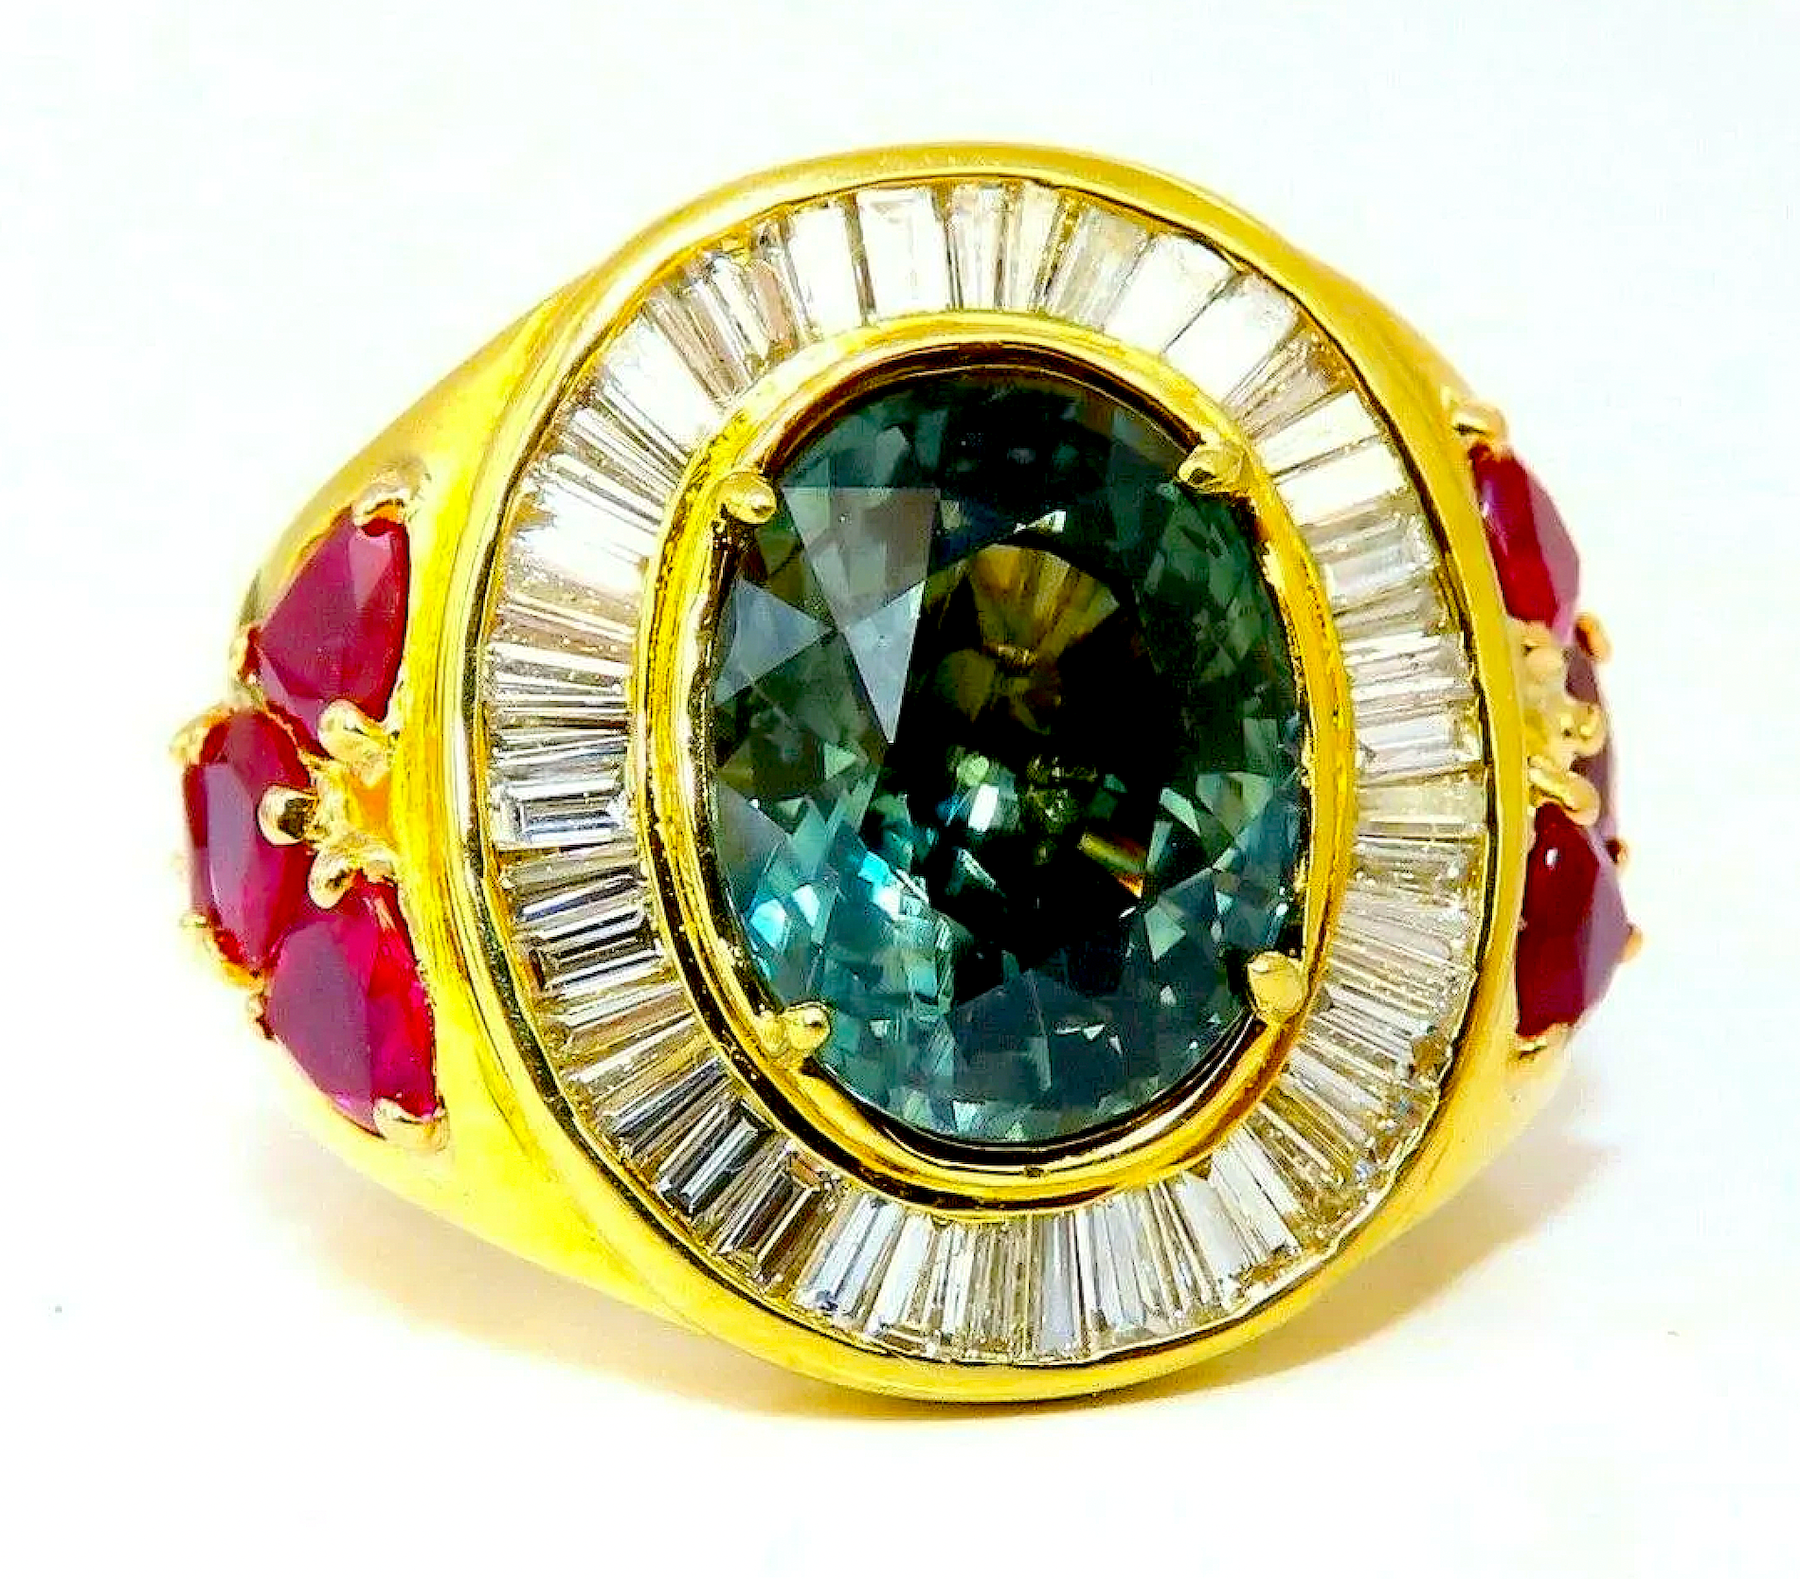  18K gold ring centered on a GIA-certified 7.71-carat natural blue-green sapphire, est. $44,000-$53,000